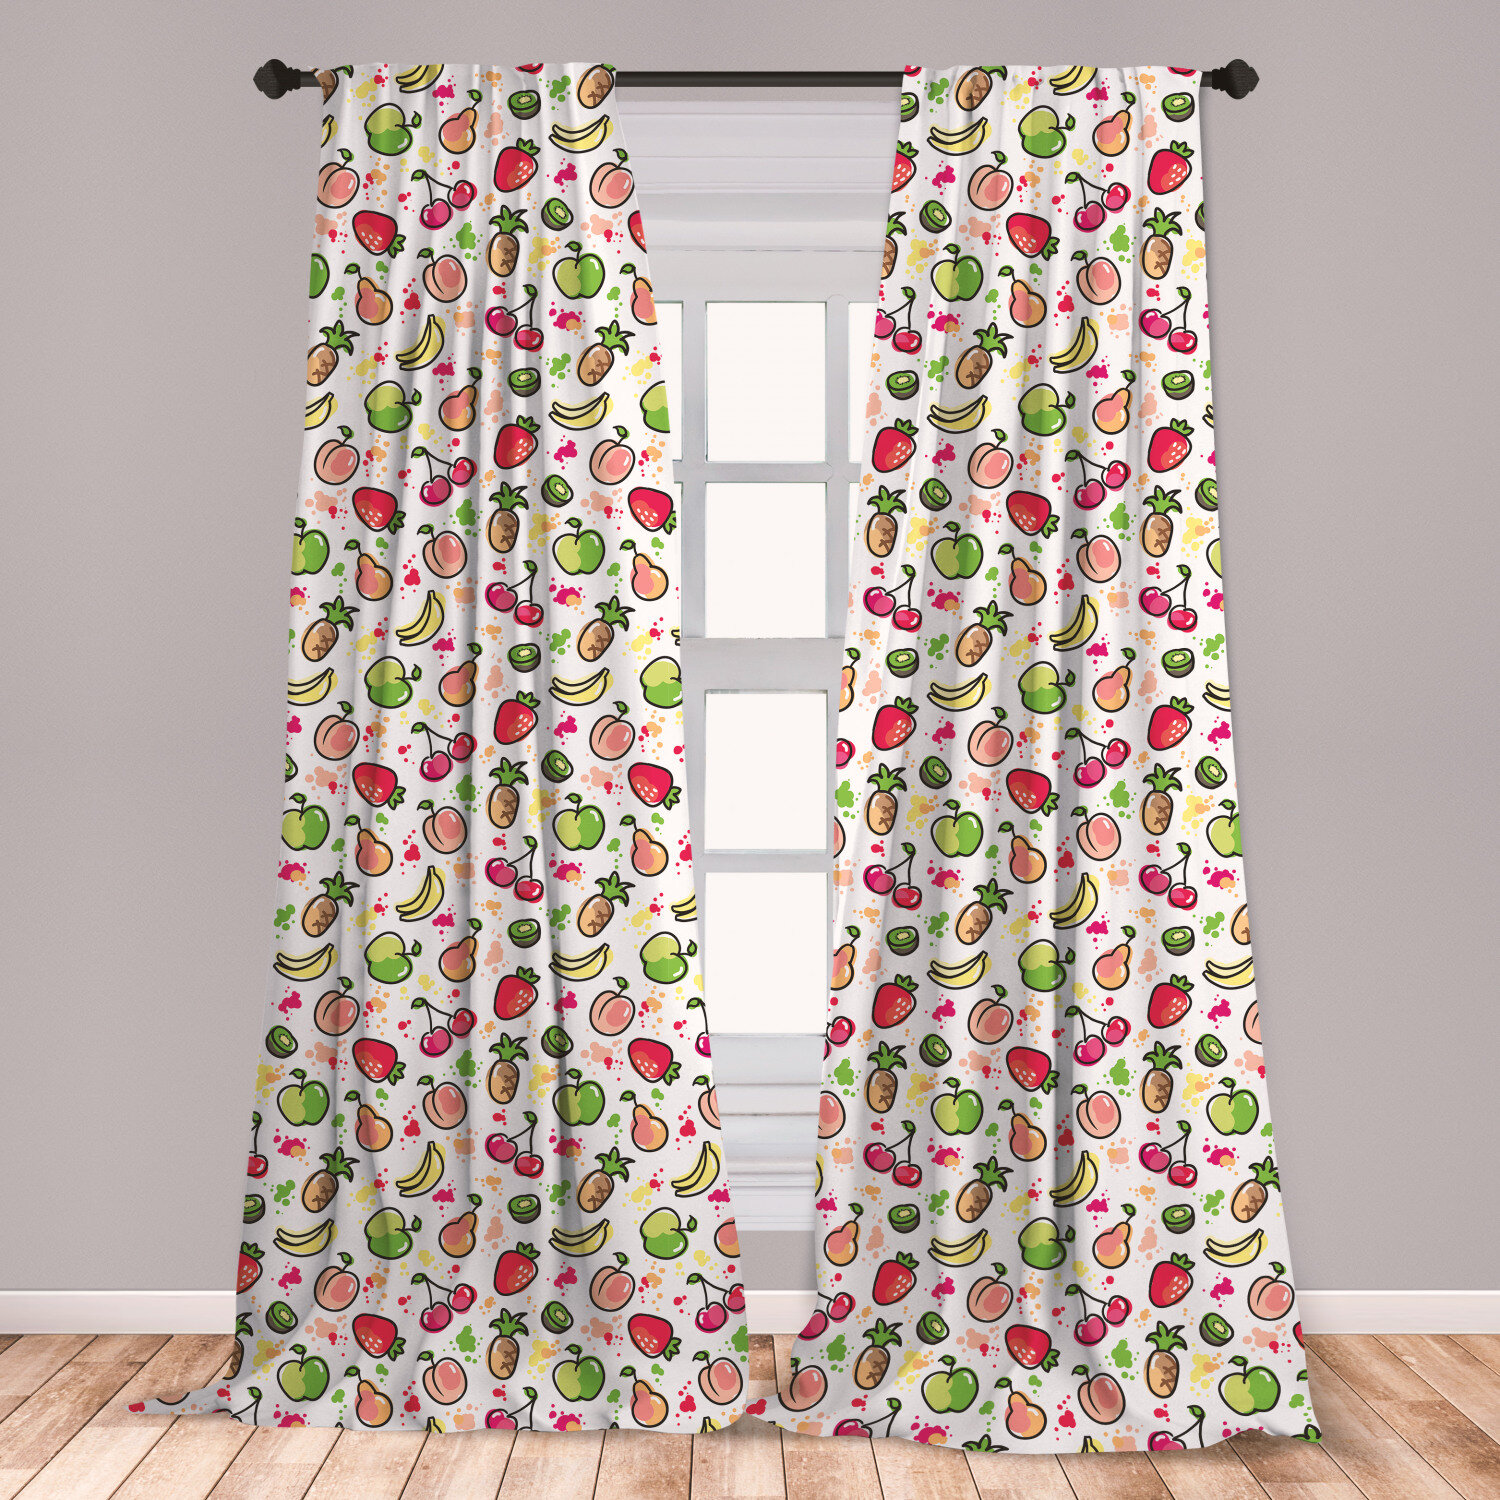 East Urban Home Ambesonne Fruits Curtains Watercolor Pear